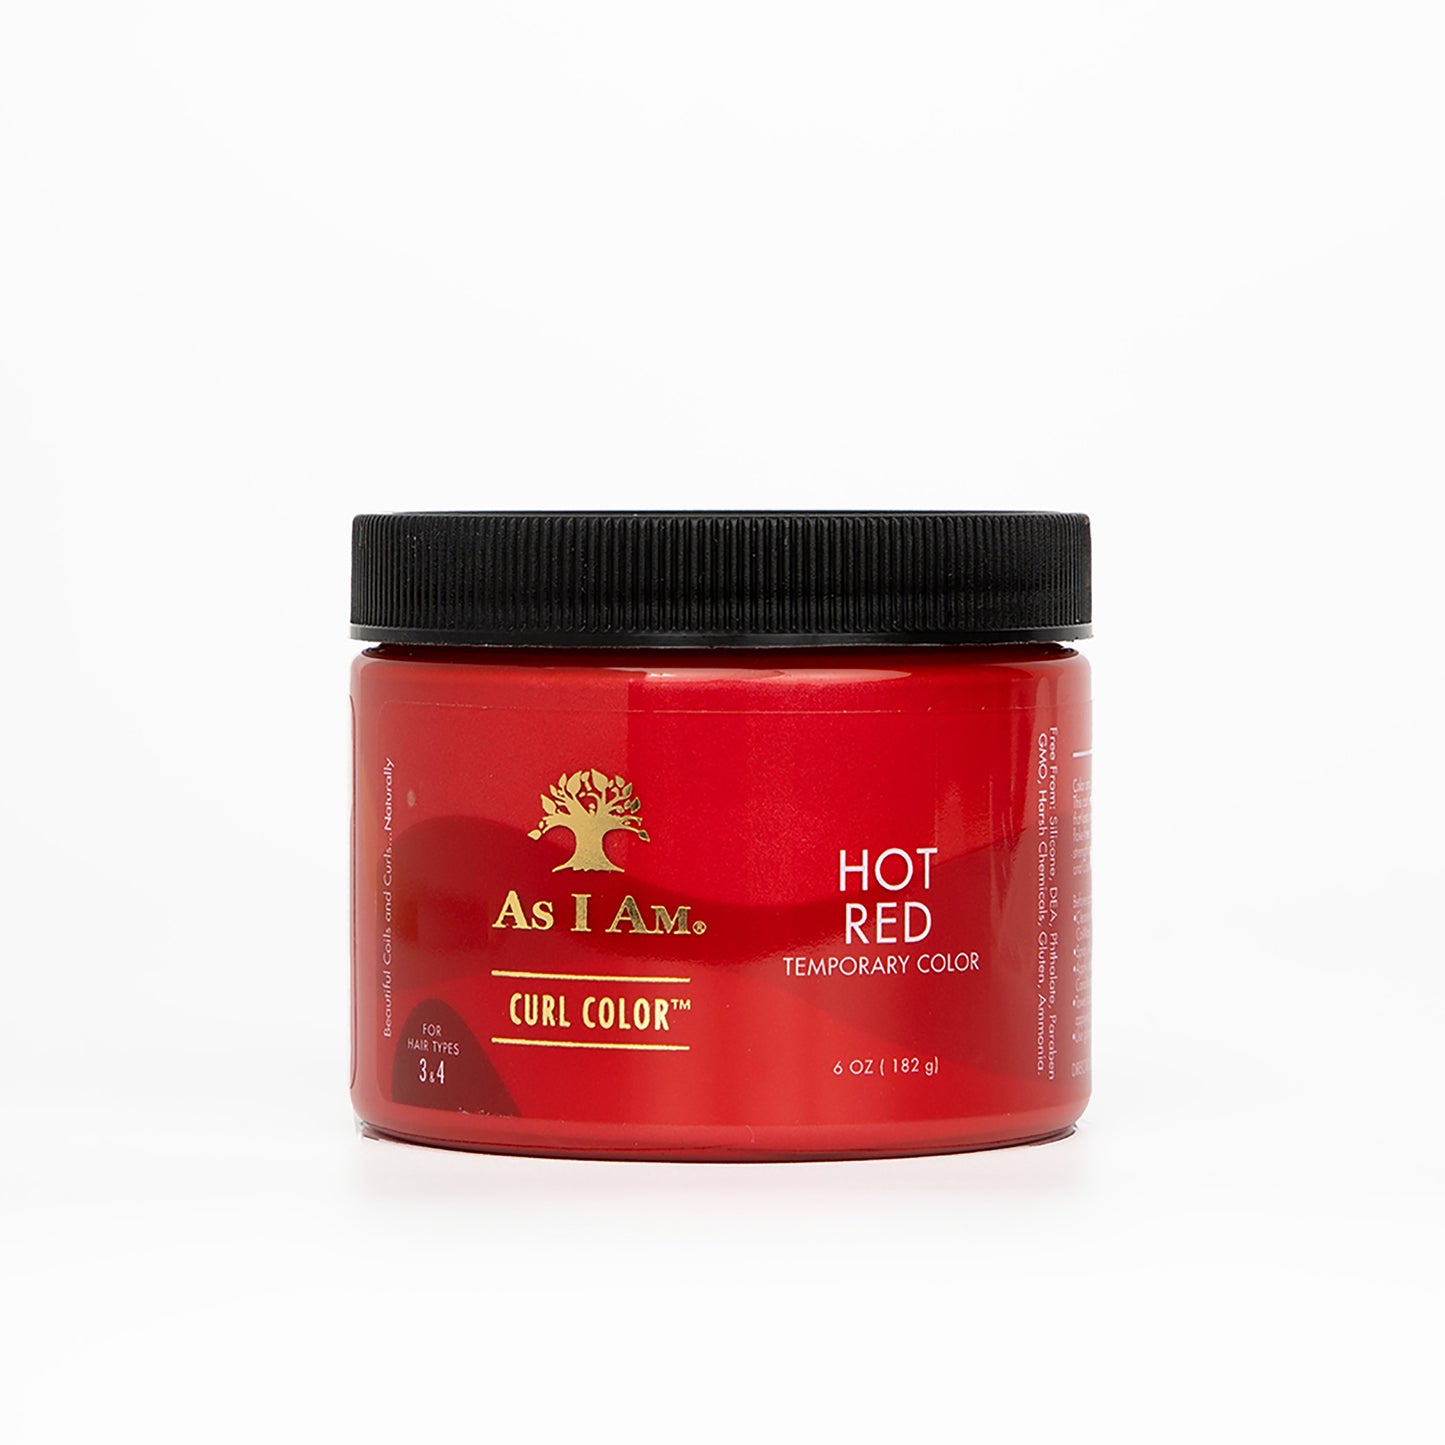 As I Am Curl Colour - Hot Red